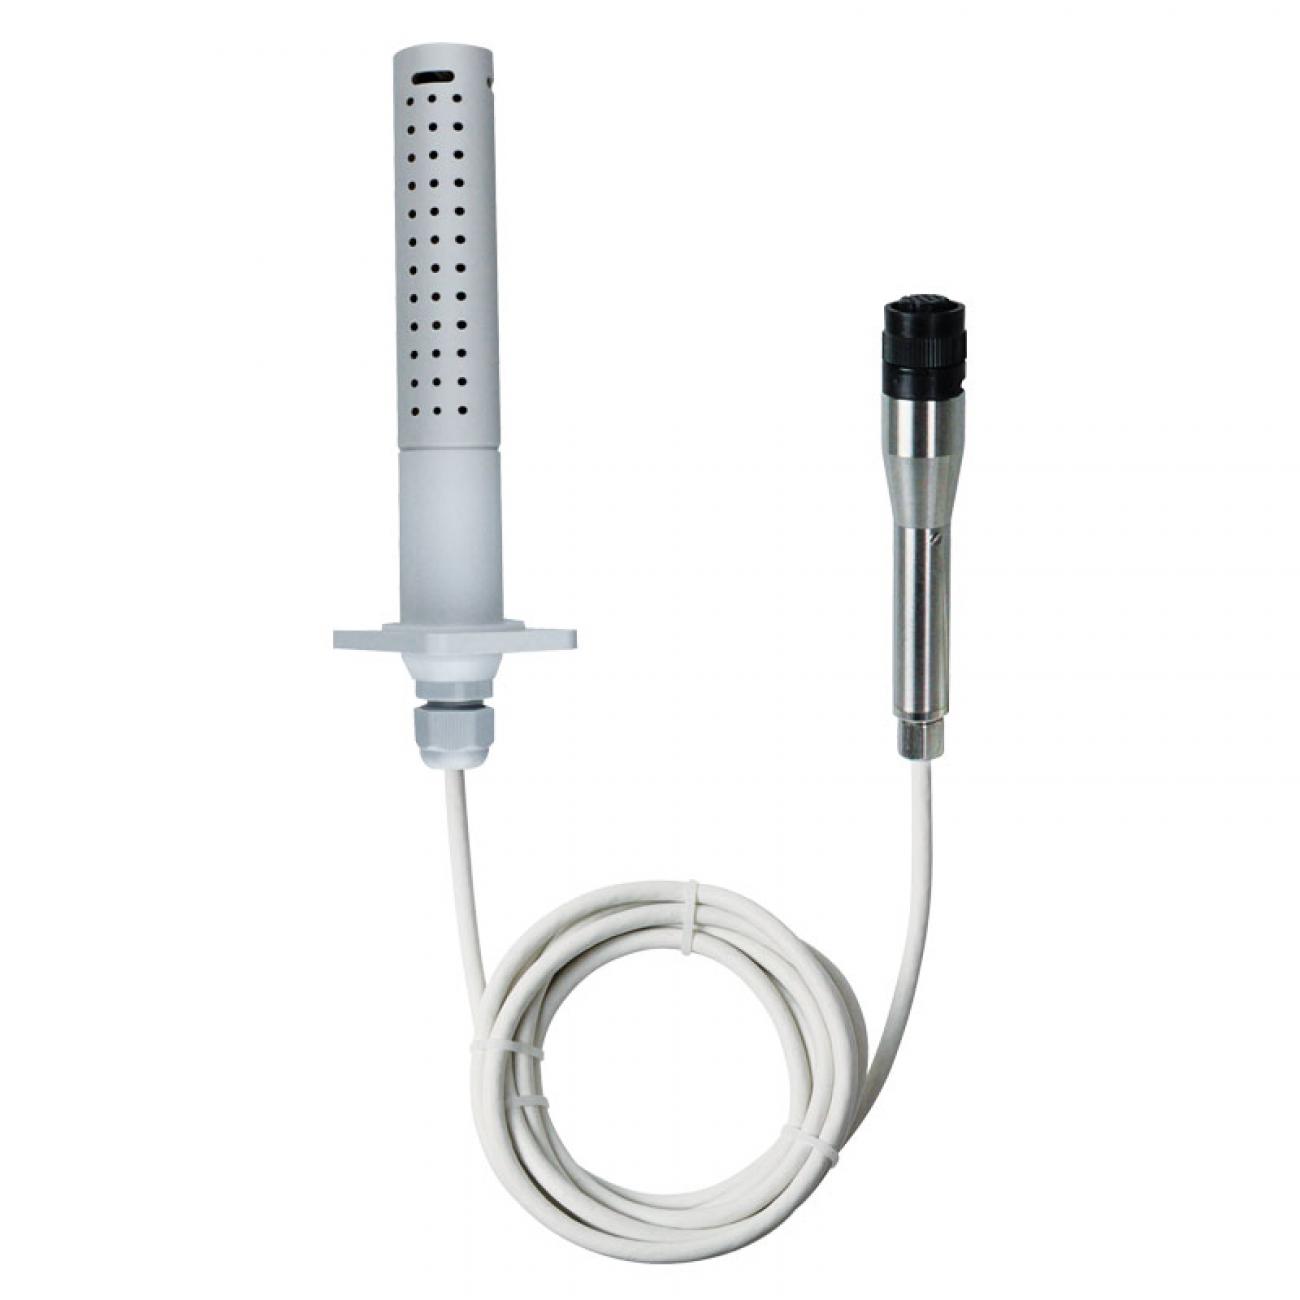 CO/CO2 probes For class 310 sensors